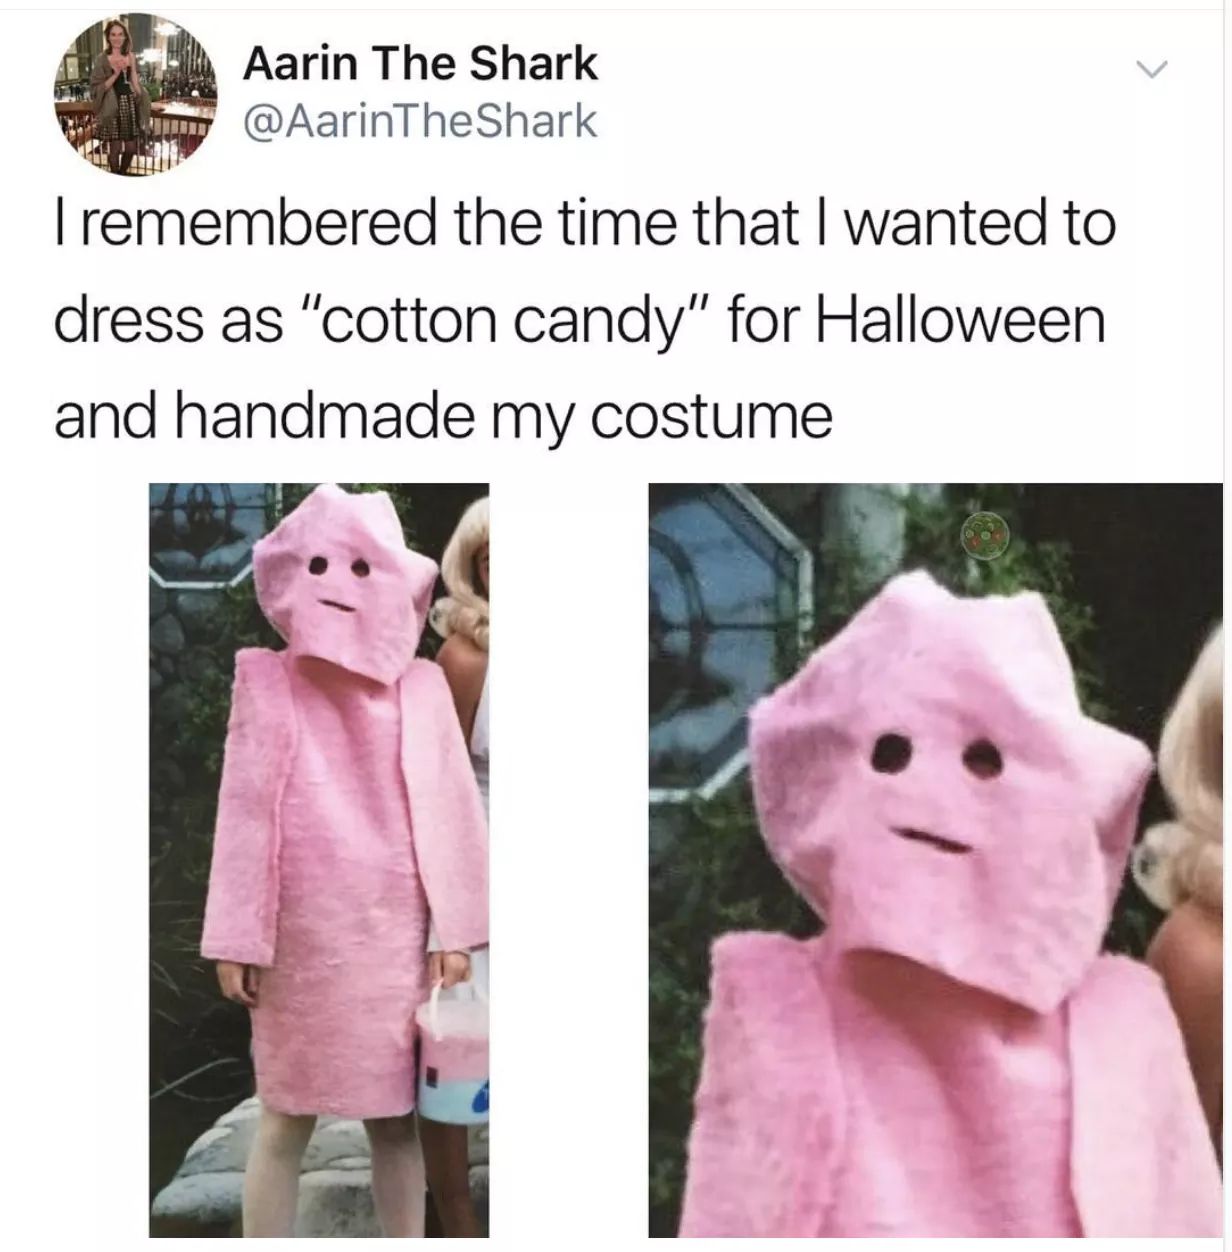 childhood trauma meme - Aarin The Shark Shark Tremembered the time that I wanted to dress as "cotton candy" for Halloween and handmade my costume